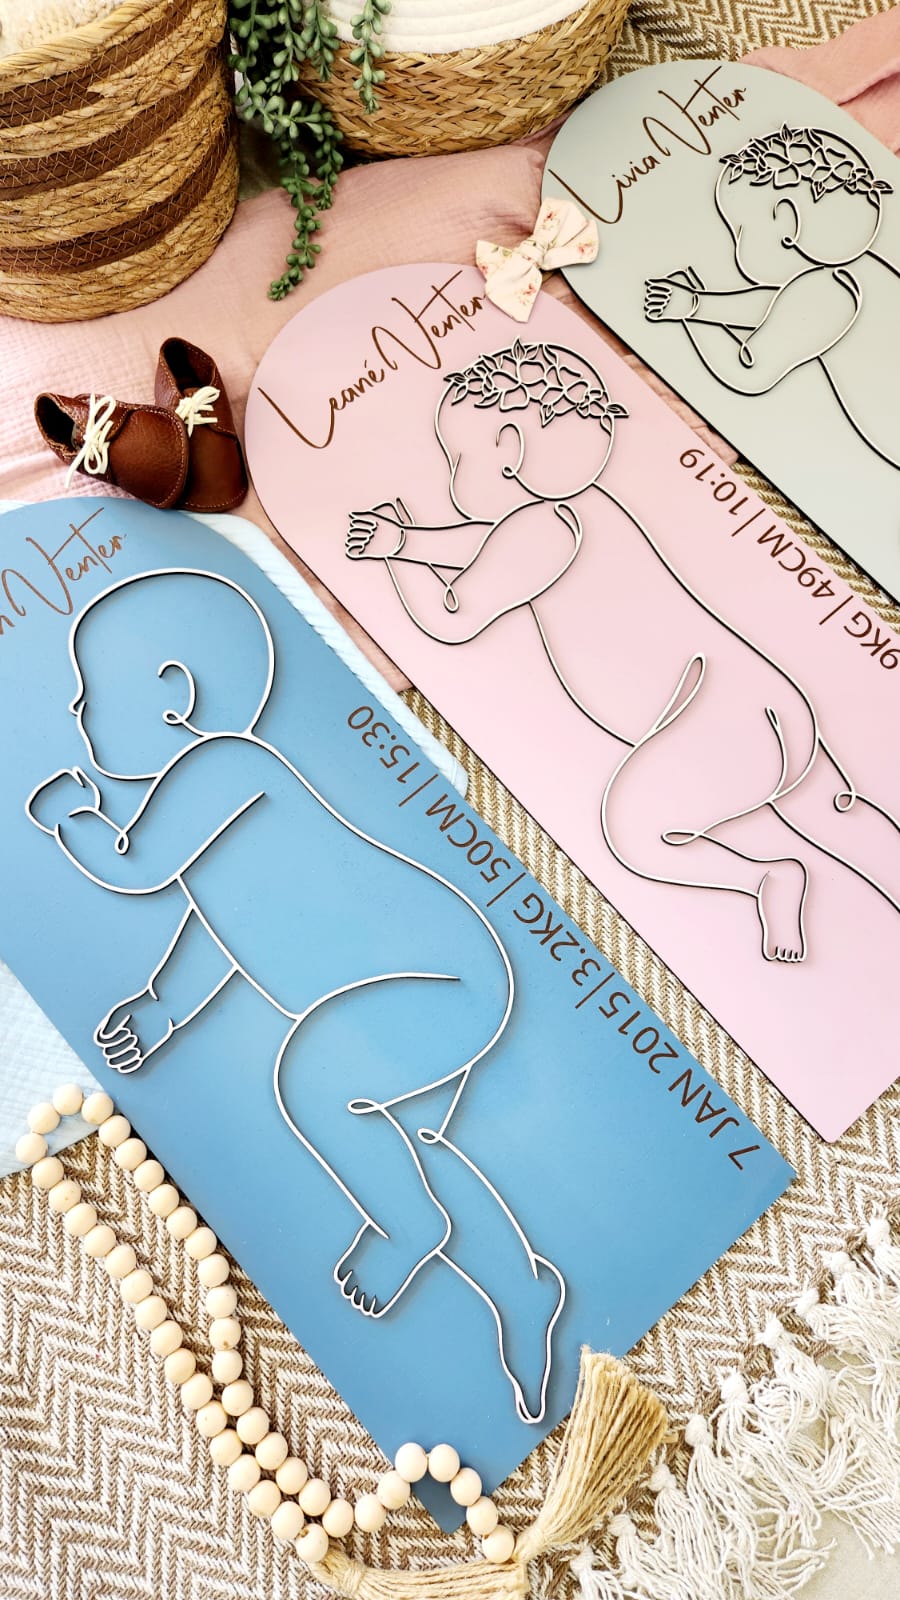 Scale 1:1 Baby outline plaque (Exact measurement of your baby at birth)